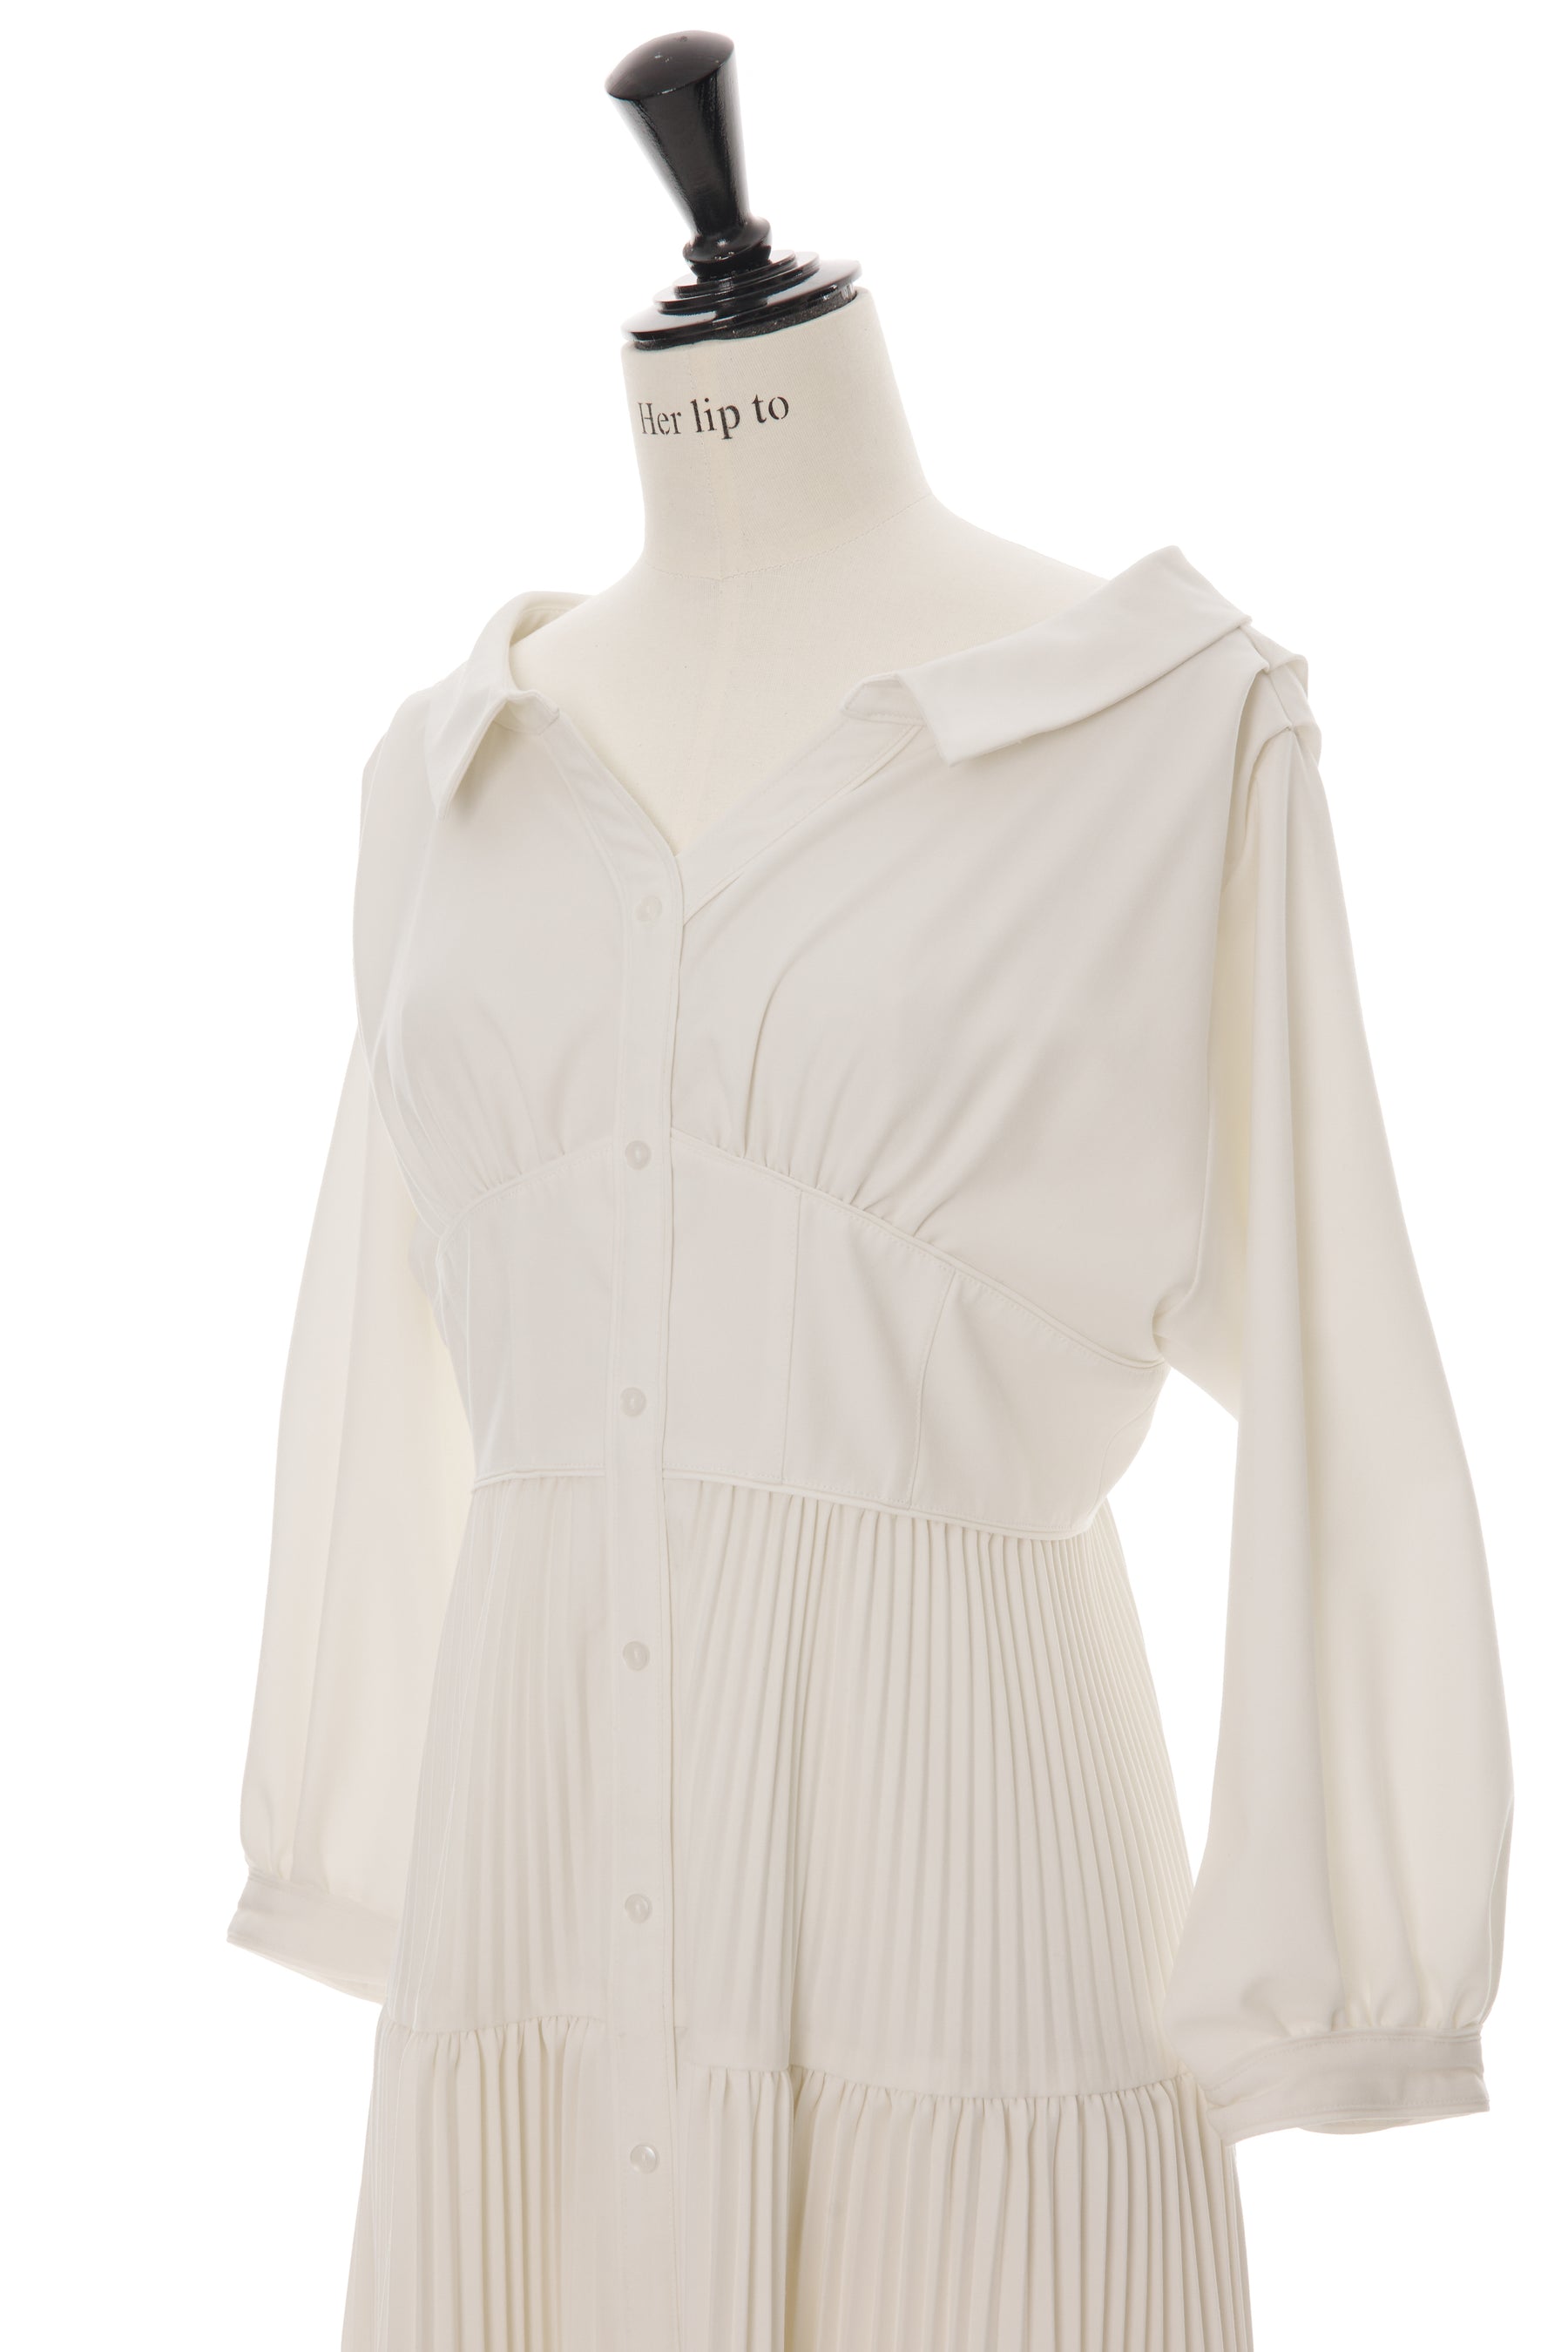 [Shipped in late April] [white petale] Pleated Open Shirt Dress